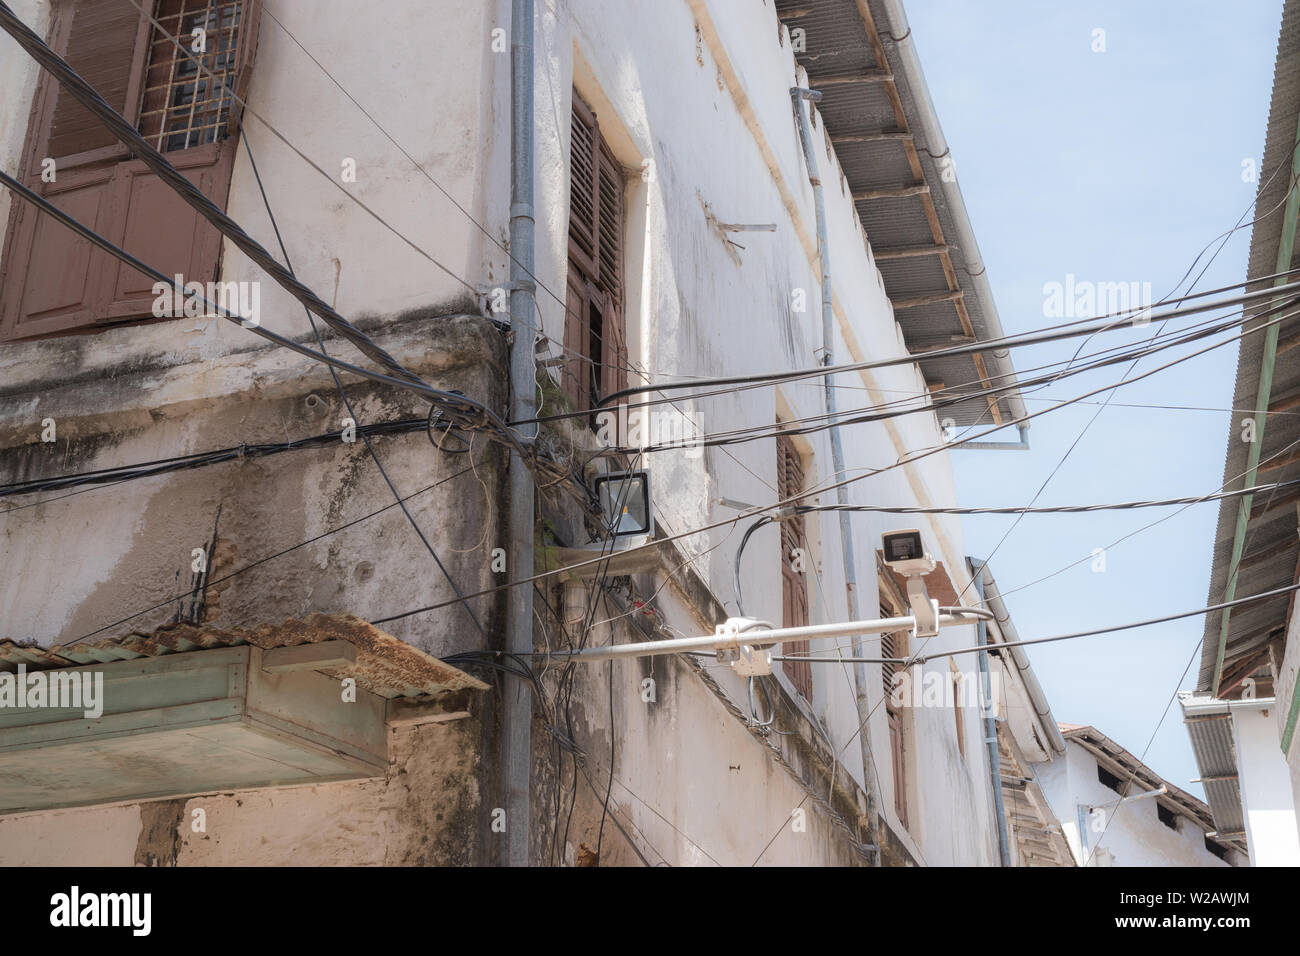 Juxtaposition of old vs new. Electrical wires between two buildings in Stone Town,Zanzibar. Stock Photo